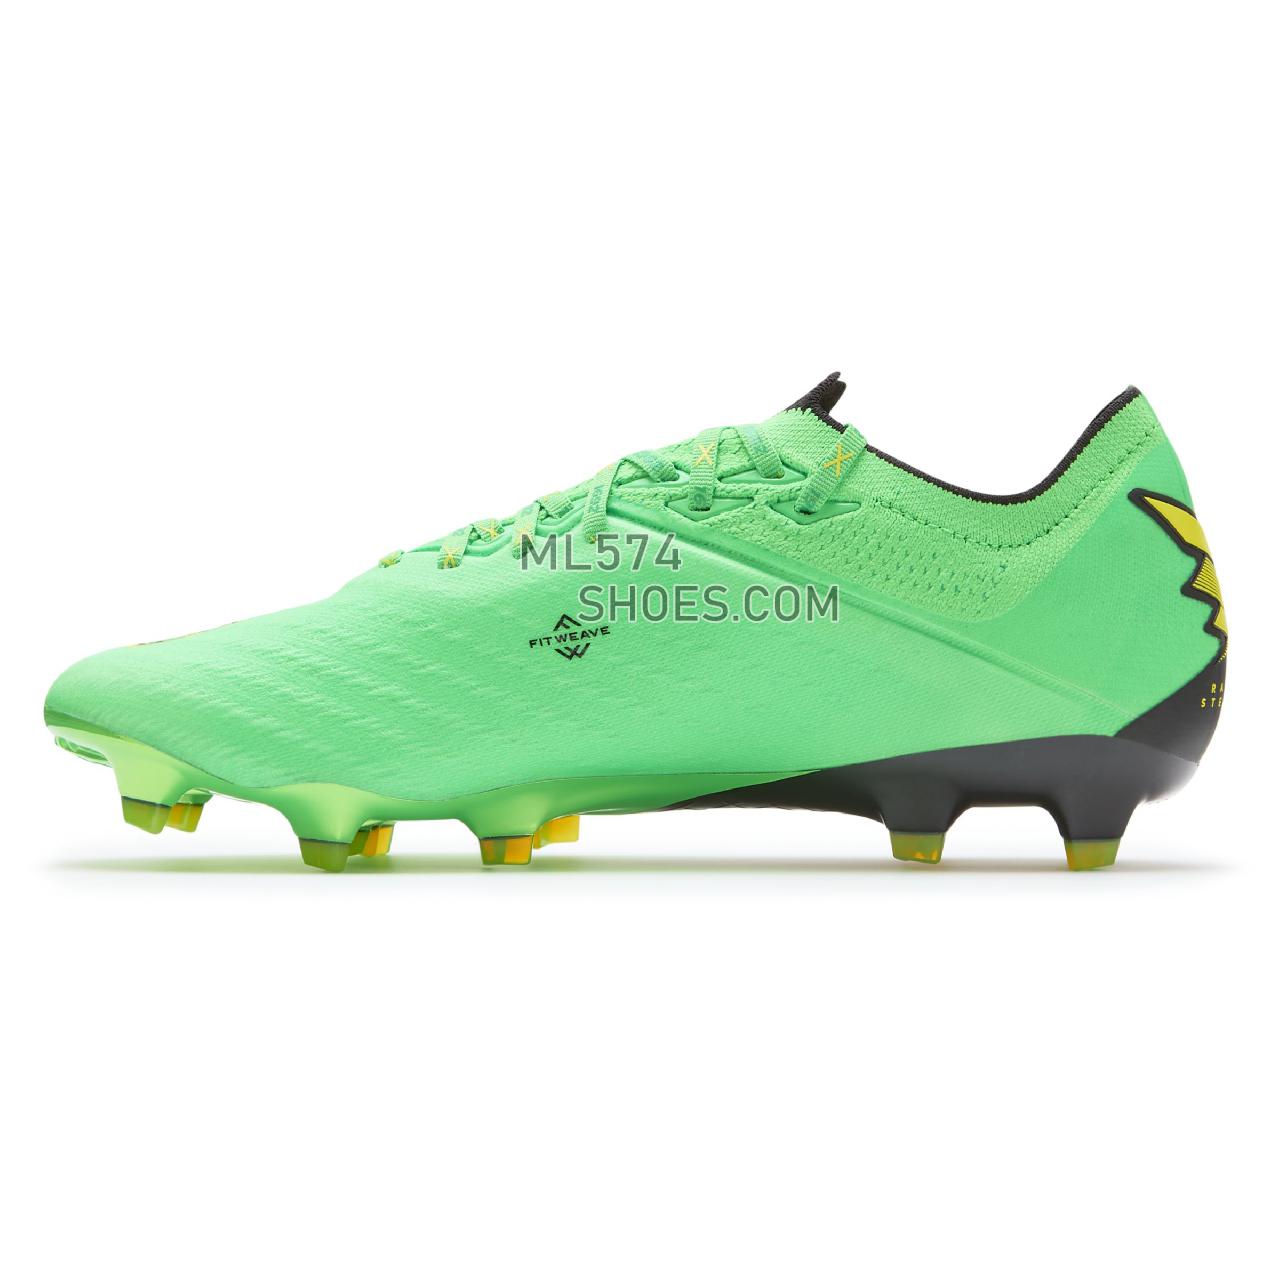 New Balance Furon V6+ Pro FG - Men's Soccer - Acidic Green with Citra Yellow and Black - MSF1F106